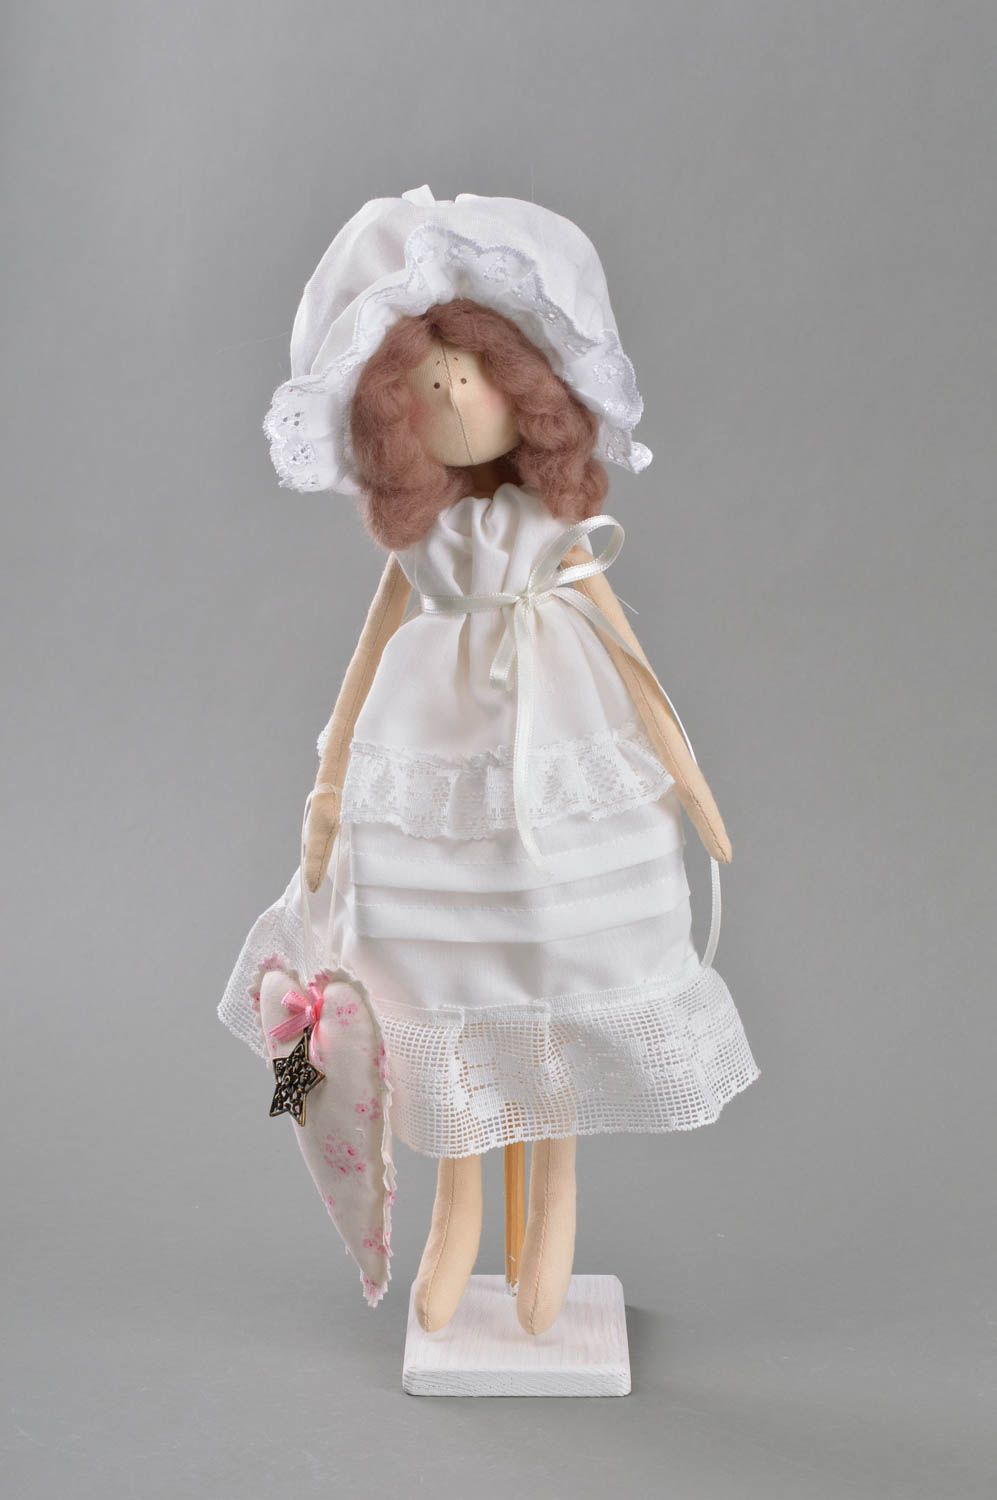 Handmade cute toy doll made of fabric in white dress and bonnet on stand photo 2